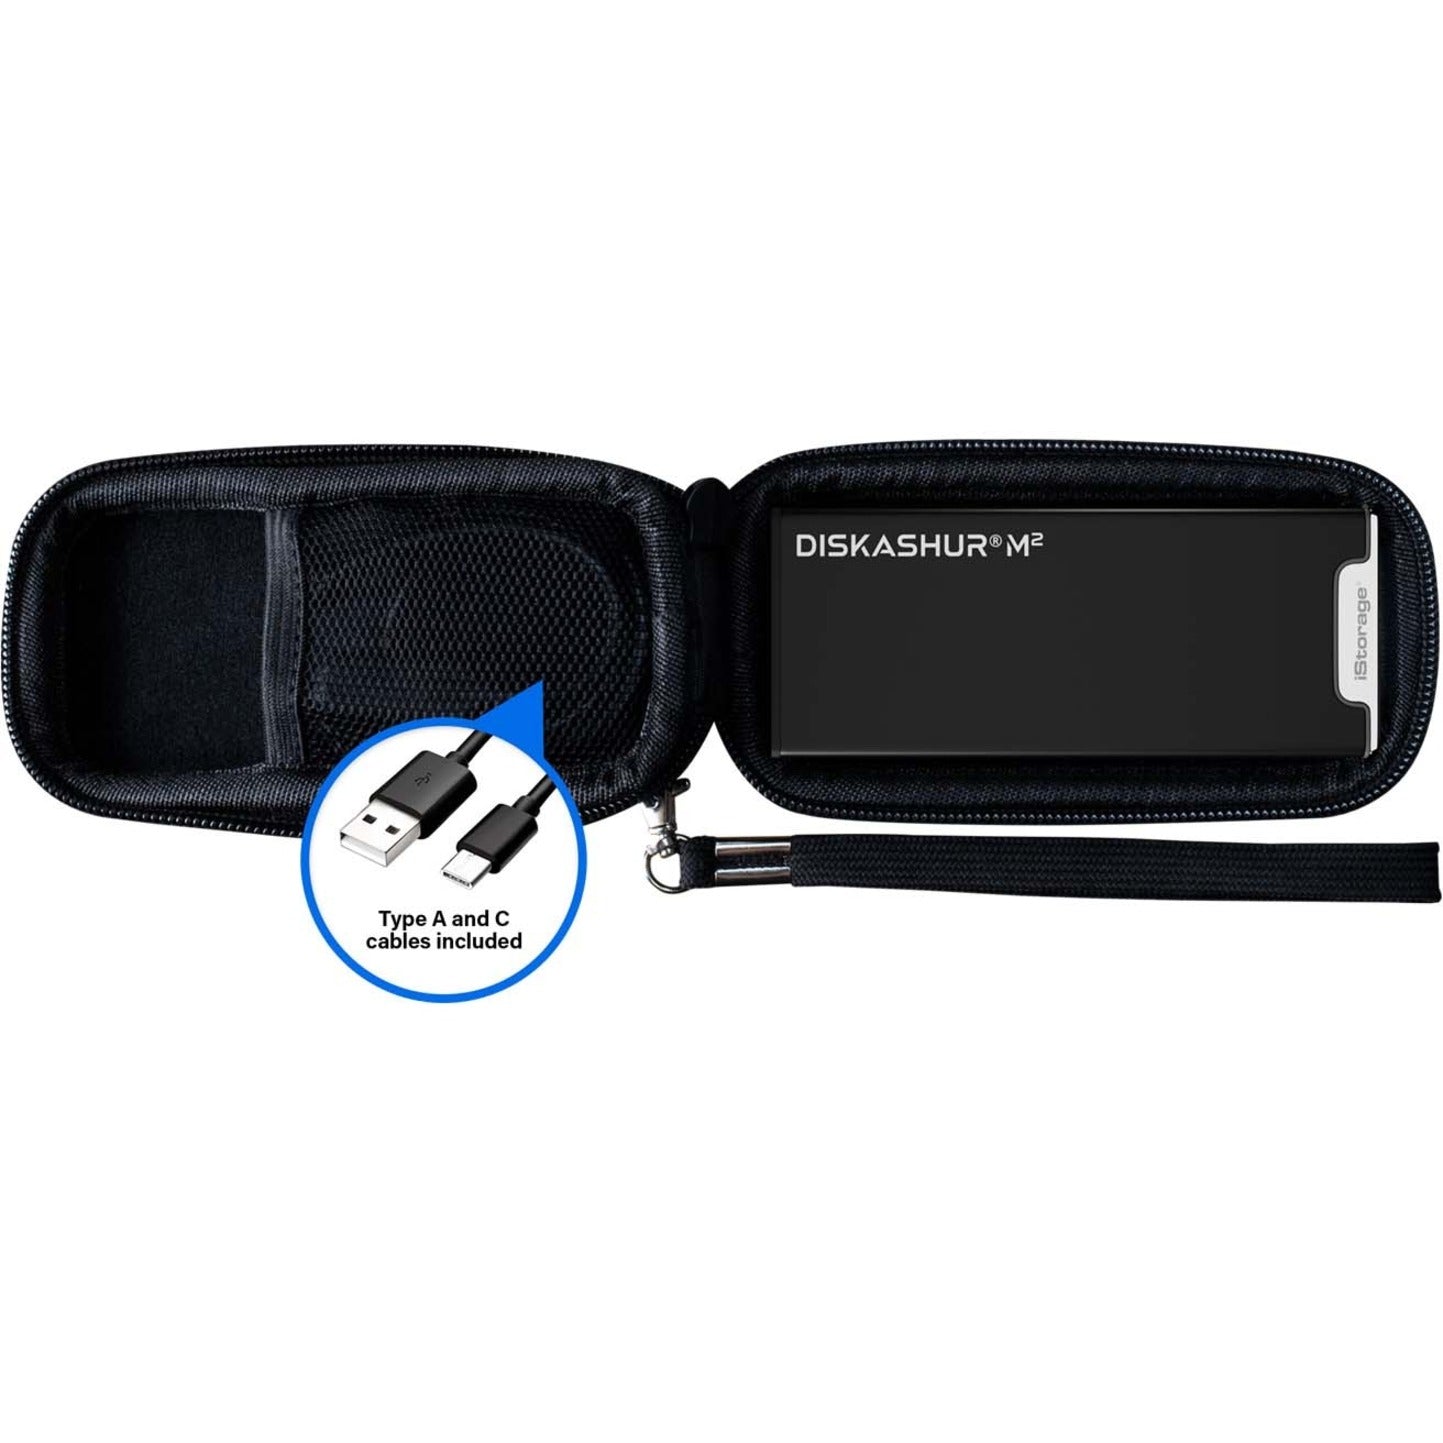 iStorage IS-DAM2-256-2000 diskAshur M2 Portable SSD, 2TB, PIN Authenticated, Hardware Encrypted, USB 3.2, Ultra-fast, FIPS Compliant, Rugged & Portable